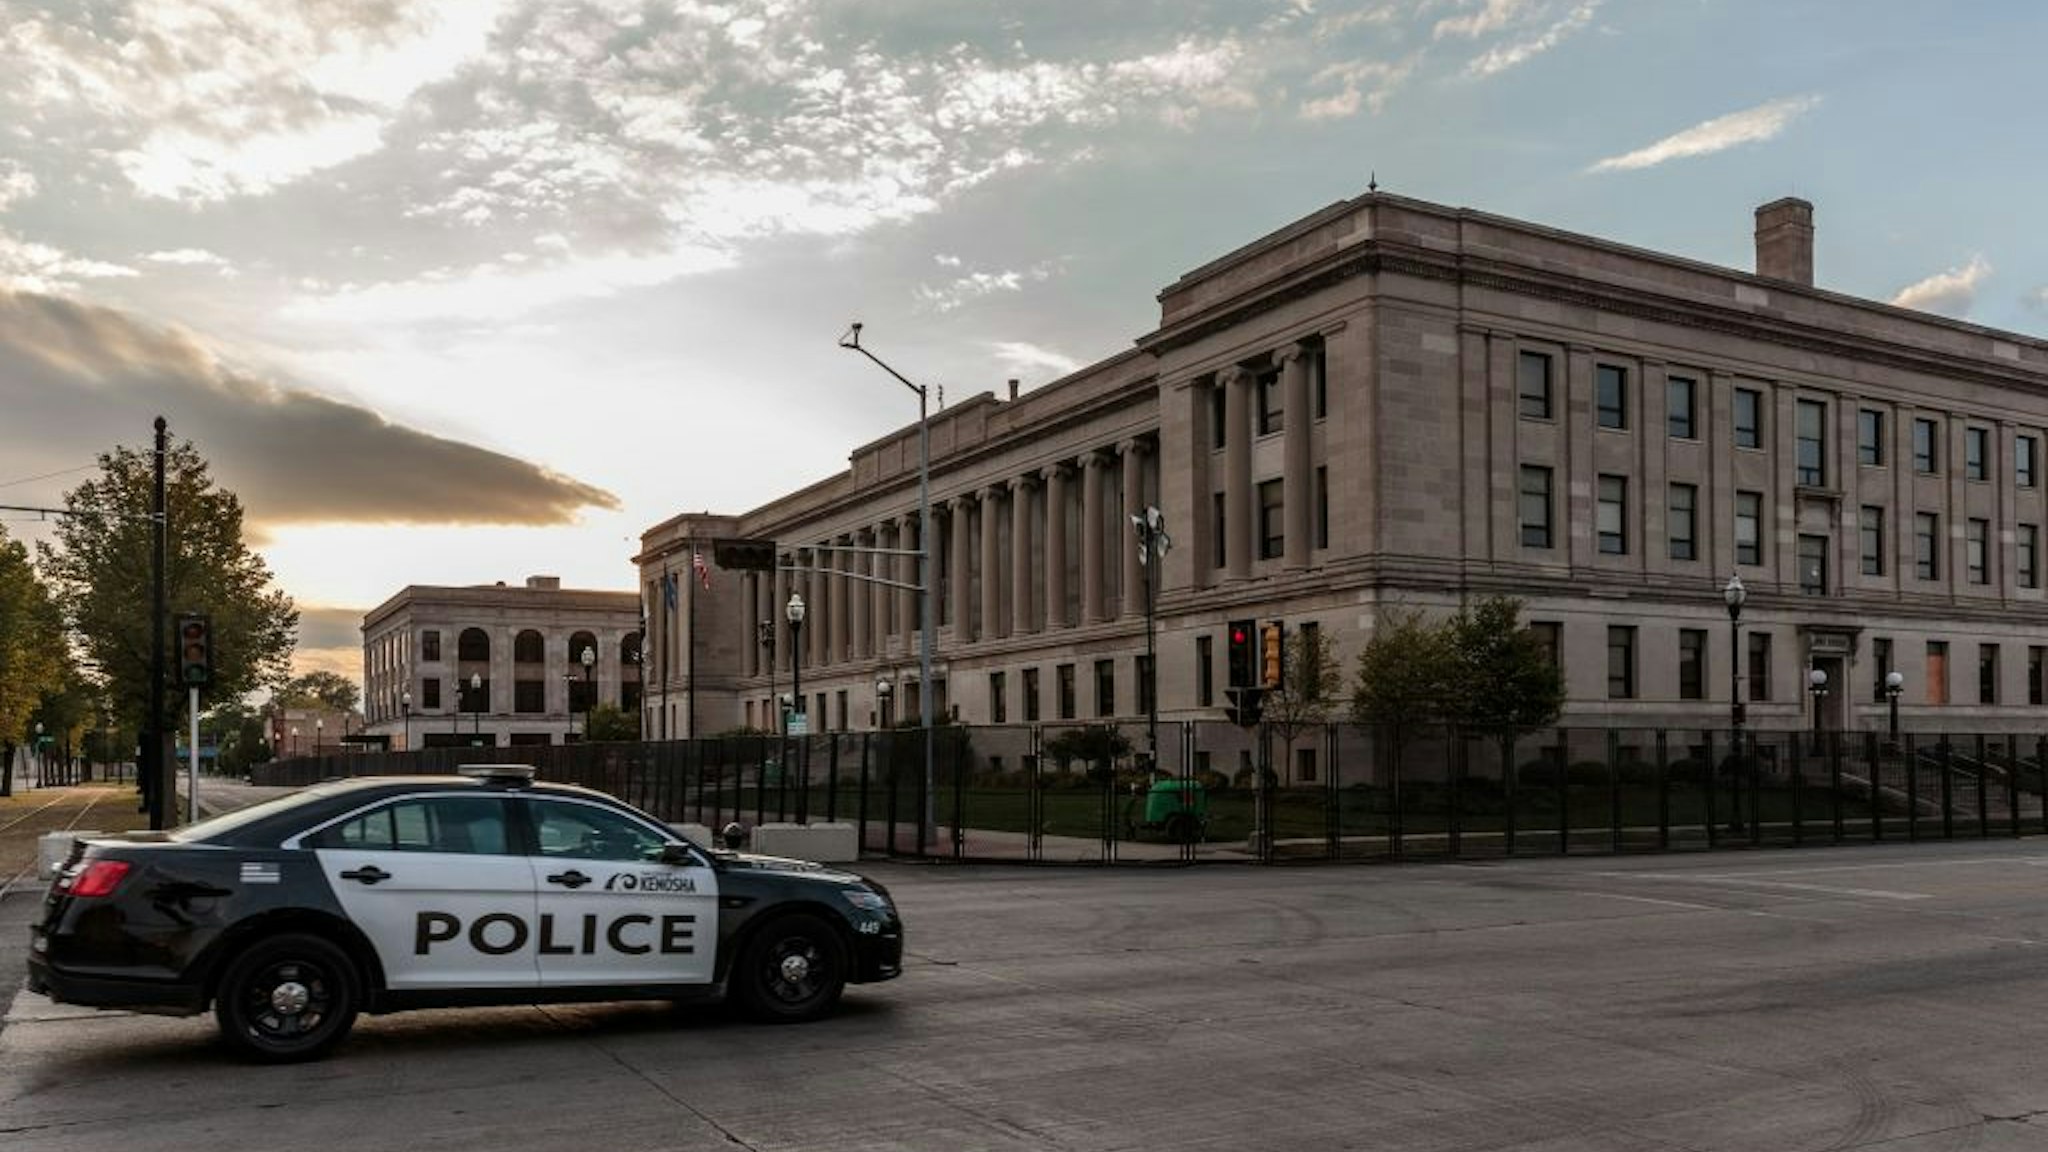 A Kenosha Police car drives past the Kenosha Courthouse surrounded by surrounded by temporary security gates during curfew in Kenosha, Wisconsin on August 31, 2020, following the shooting of Jacob Blake by police. - Donald Trump has no plans to meet with relatives of Jacob Blake, a black man who was shot by police, when the president visits the Wisconsin city where the shooting sparked violent demonstrations, the White House said on August 31. Trump travels to Kenosha, Wisconsin on September 1, defying Democratic leaders there who have reportedly urged him not to visit the city in the wake of the shooting. (Photo by Kerem Yucel / AFP) (Photo by KEREM YUCEL/AFP via Getty Images)